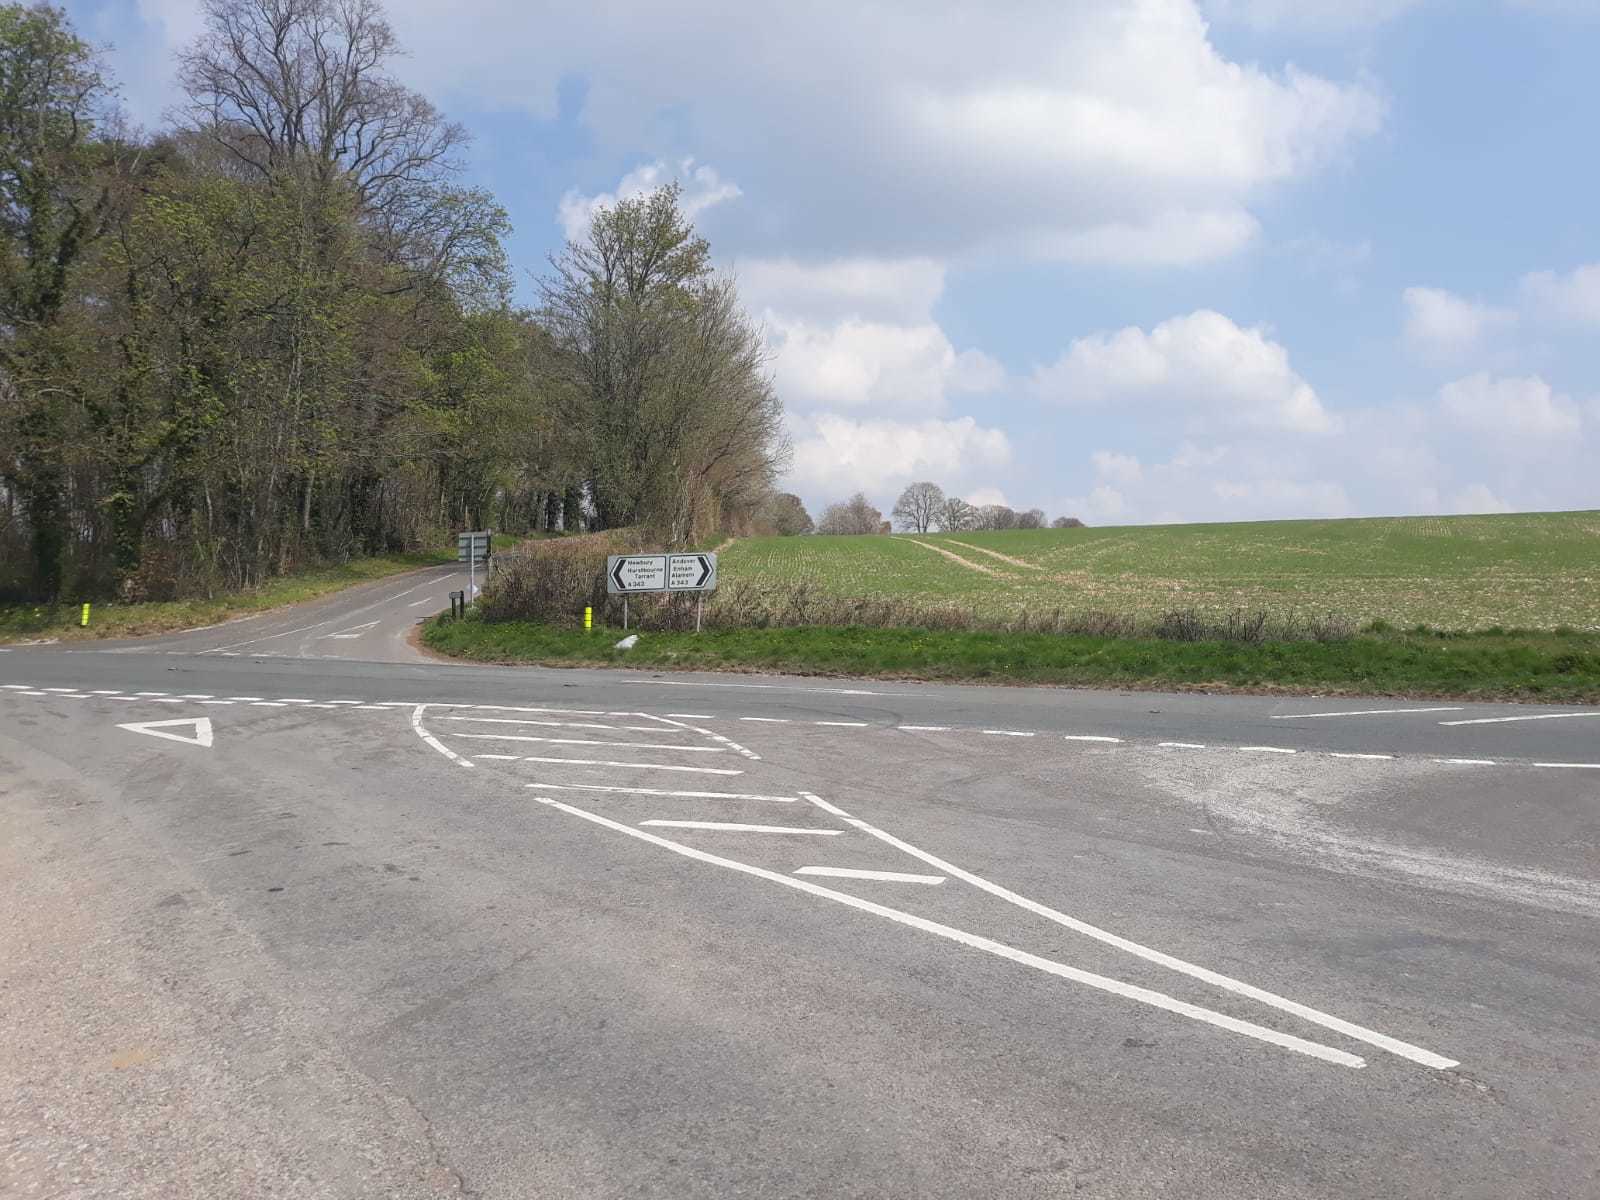 The junction of Foxcotte Lane with the A343